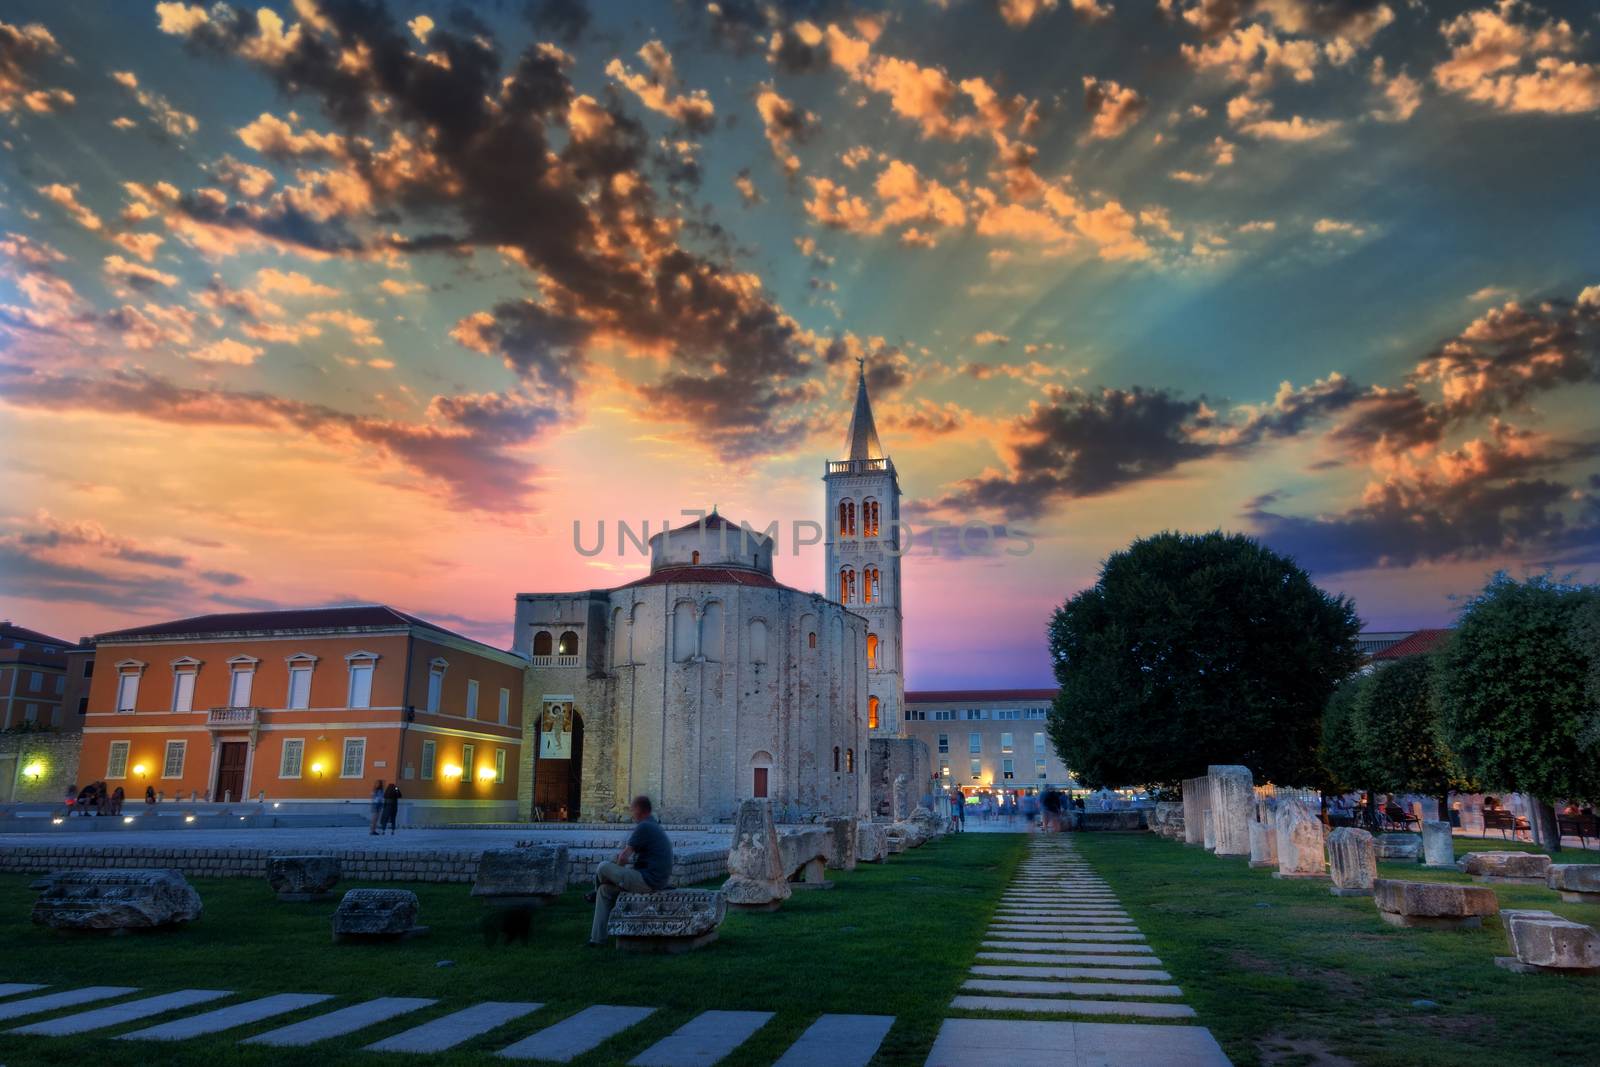 Dramatic sky in Sunset above the old roman square in Zadar, Croatia, with the ancient church of St Donat, long exposure, people blurred and unrecognizable